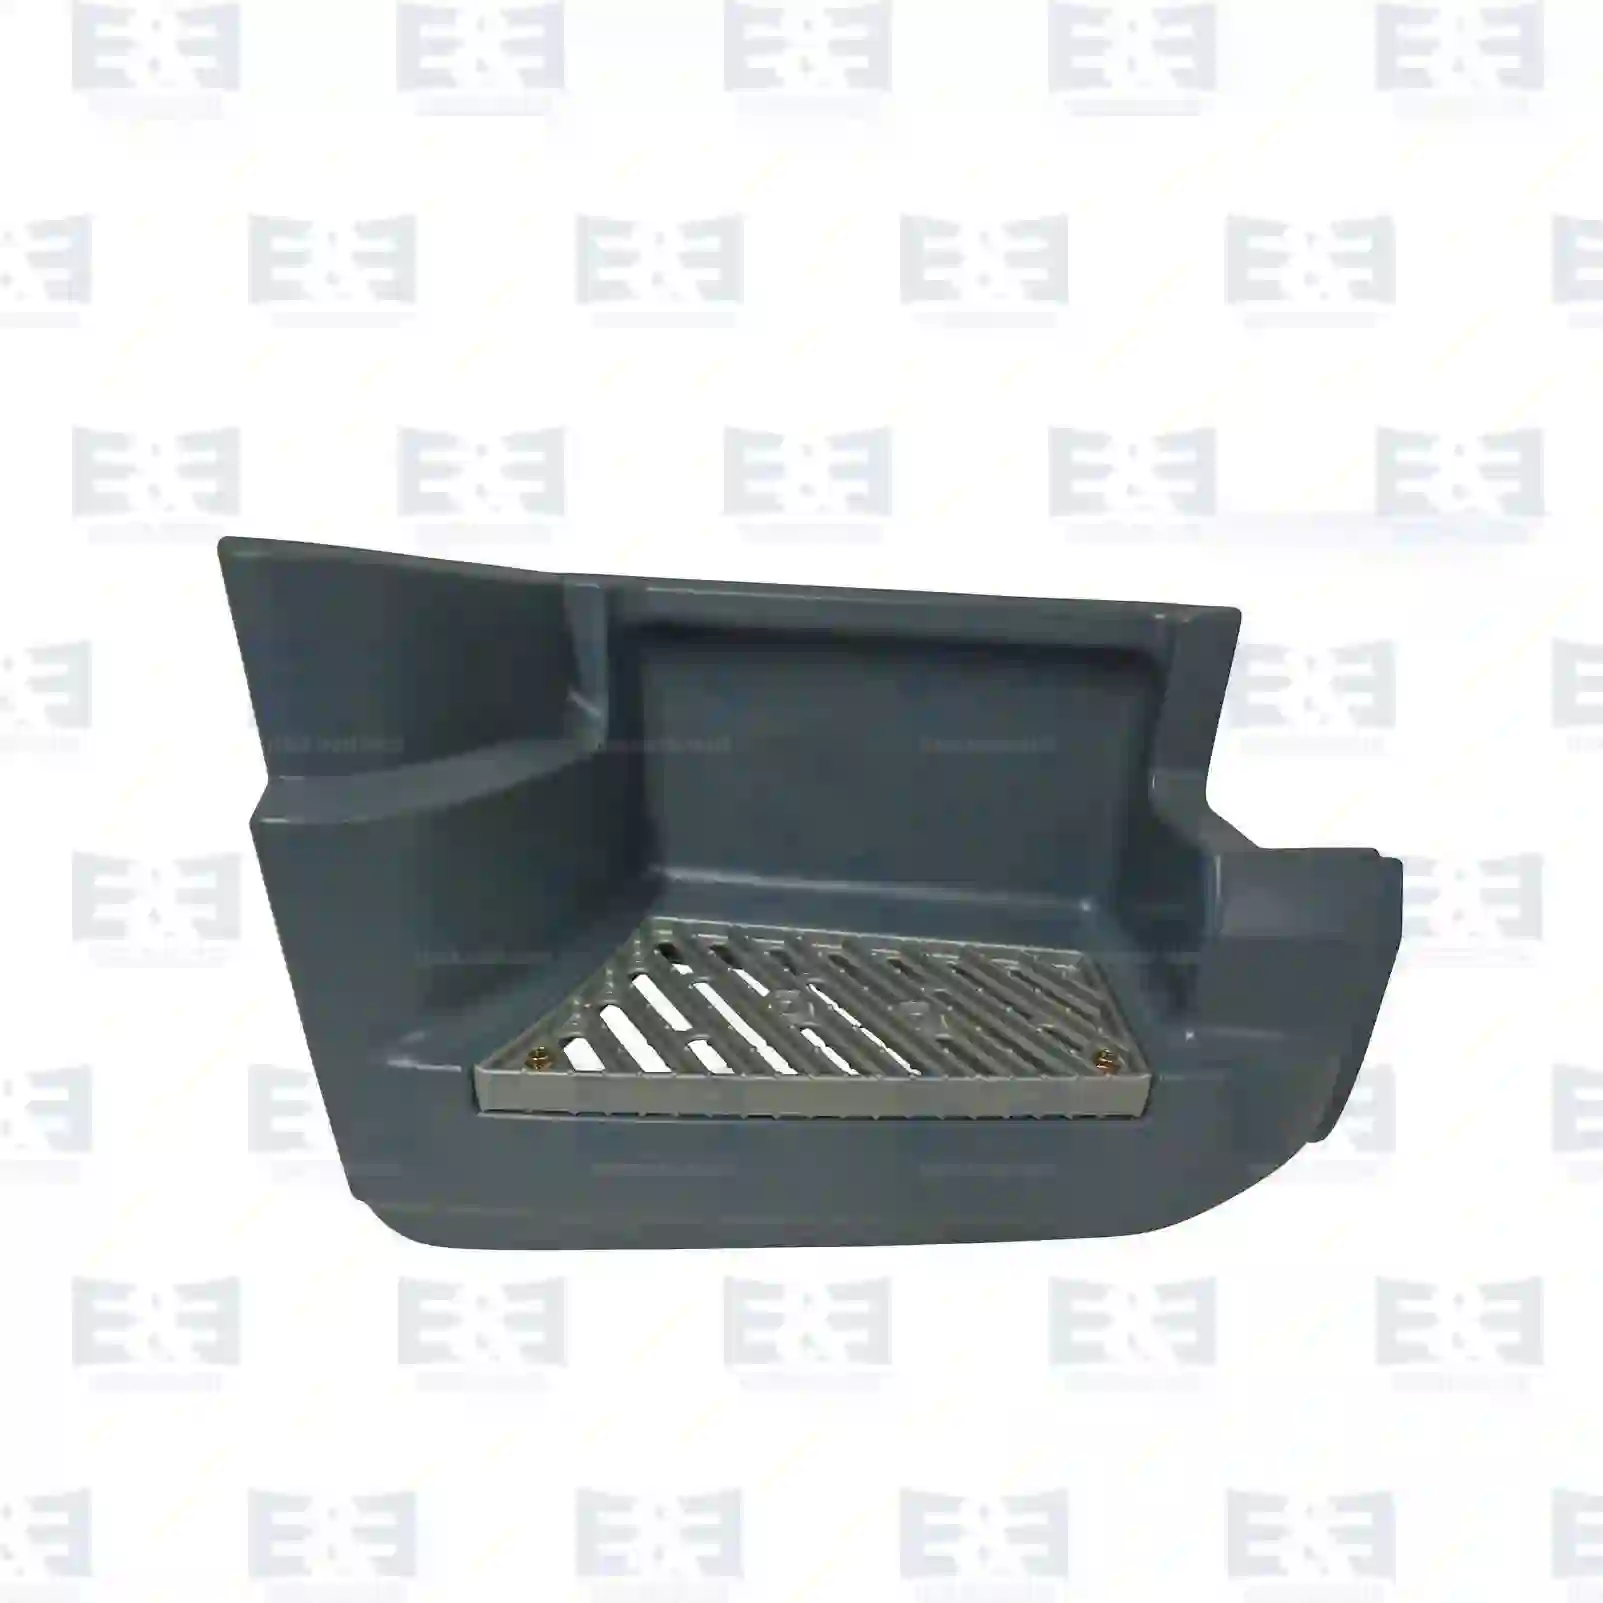 Step well case, right, with step, 2E2291328, 1405241S1, 1405989S ||  2E2291328 E&E Truck Spare Parts | Truck Spare Parts, Auotomotive Spare Parts Step well case, right, with step, 2E2291328, 1405241S1, 1405989S ||  2E2291328 E&E Truck Spare Parts | Truck Spare Parts, Auotomotive Spare Parts